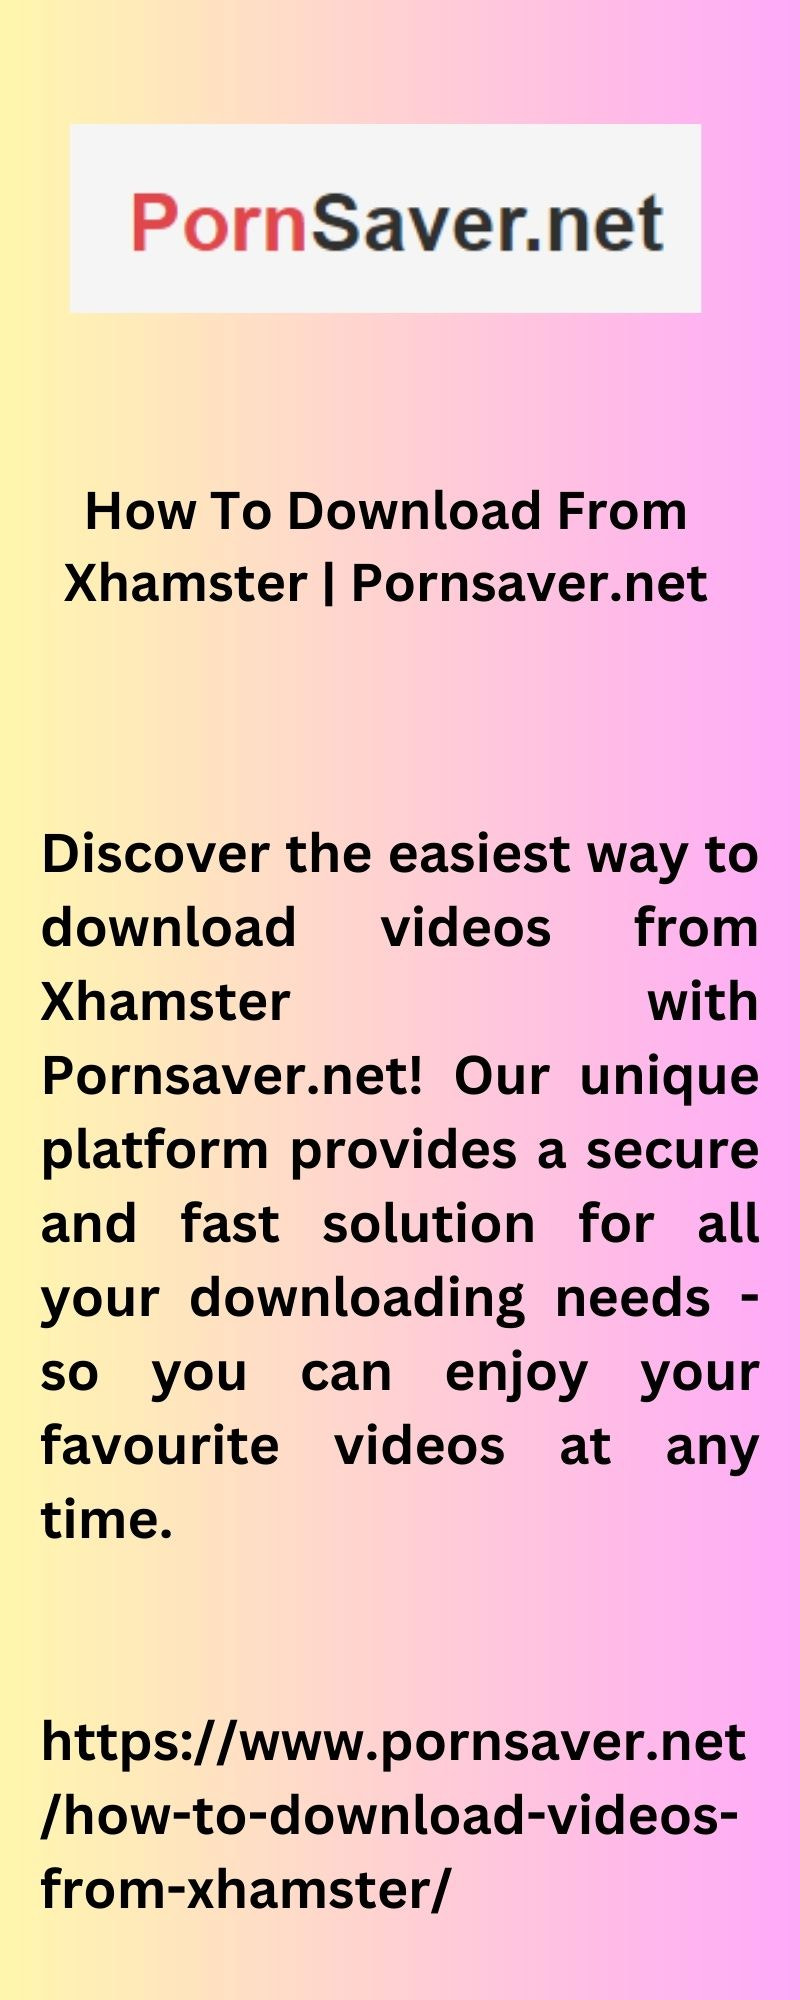 How To Download From Xhamster | Pornsaver.net